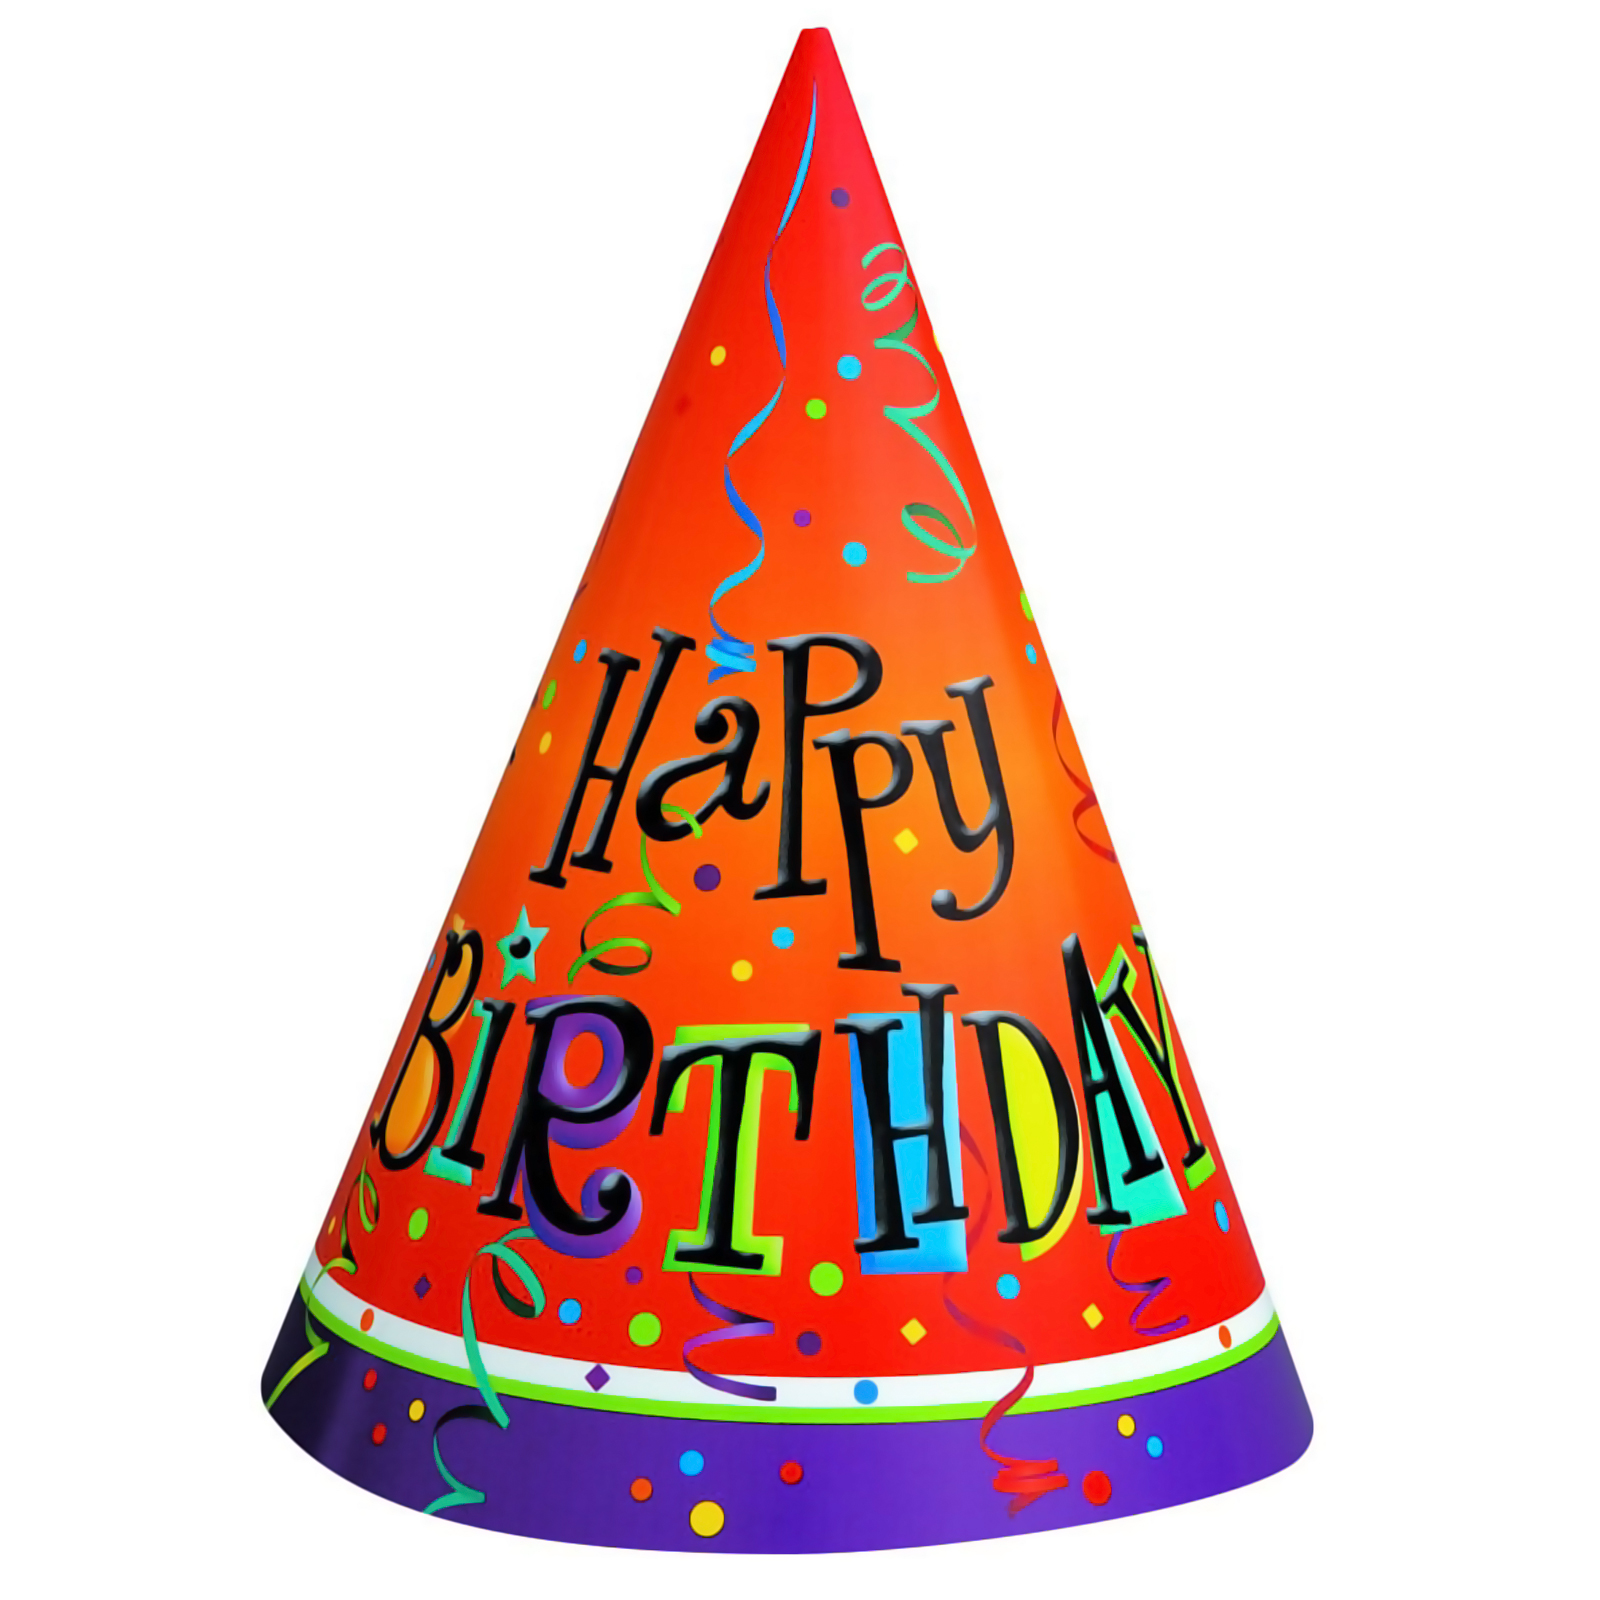 Birthday Party Caps Png - ClipArt Best